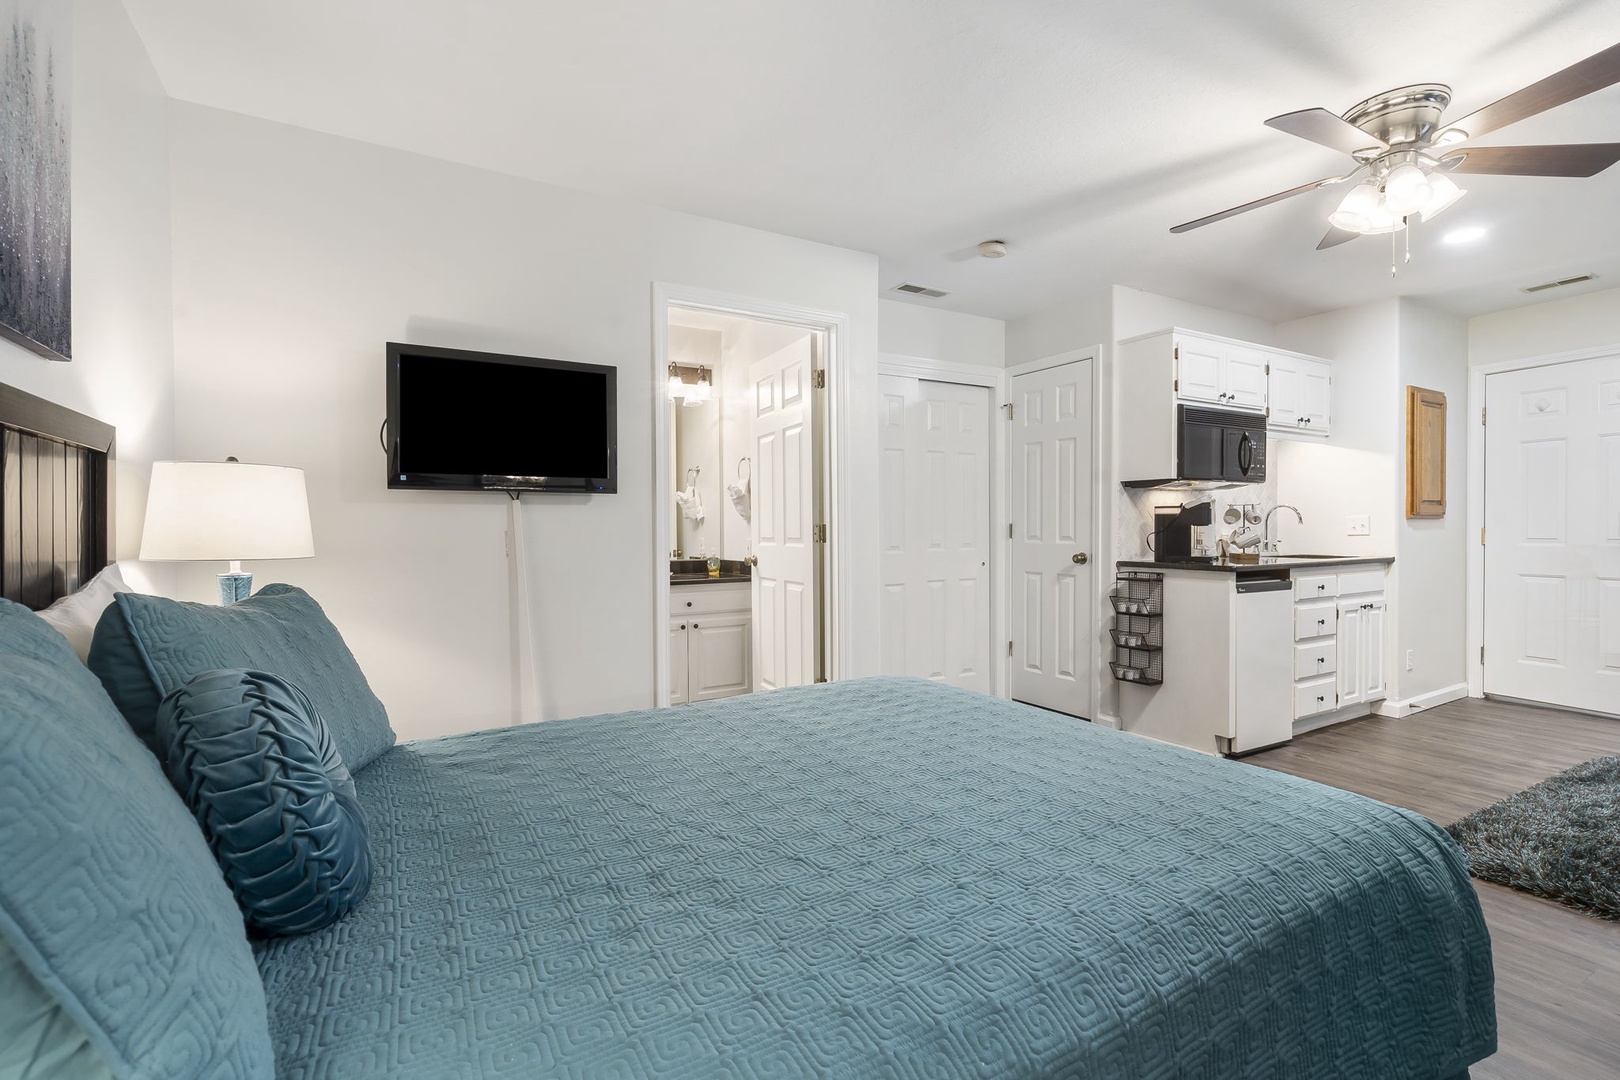 The private guest suite offers a kitchenette, Queen Bed, Bathroom, and Twin Sleeper Sofa